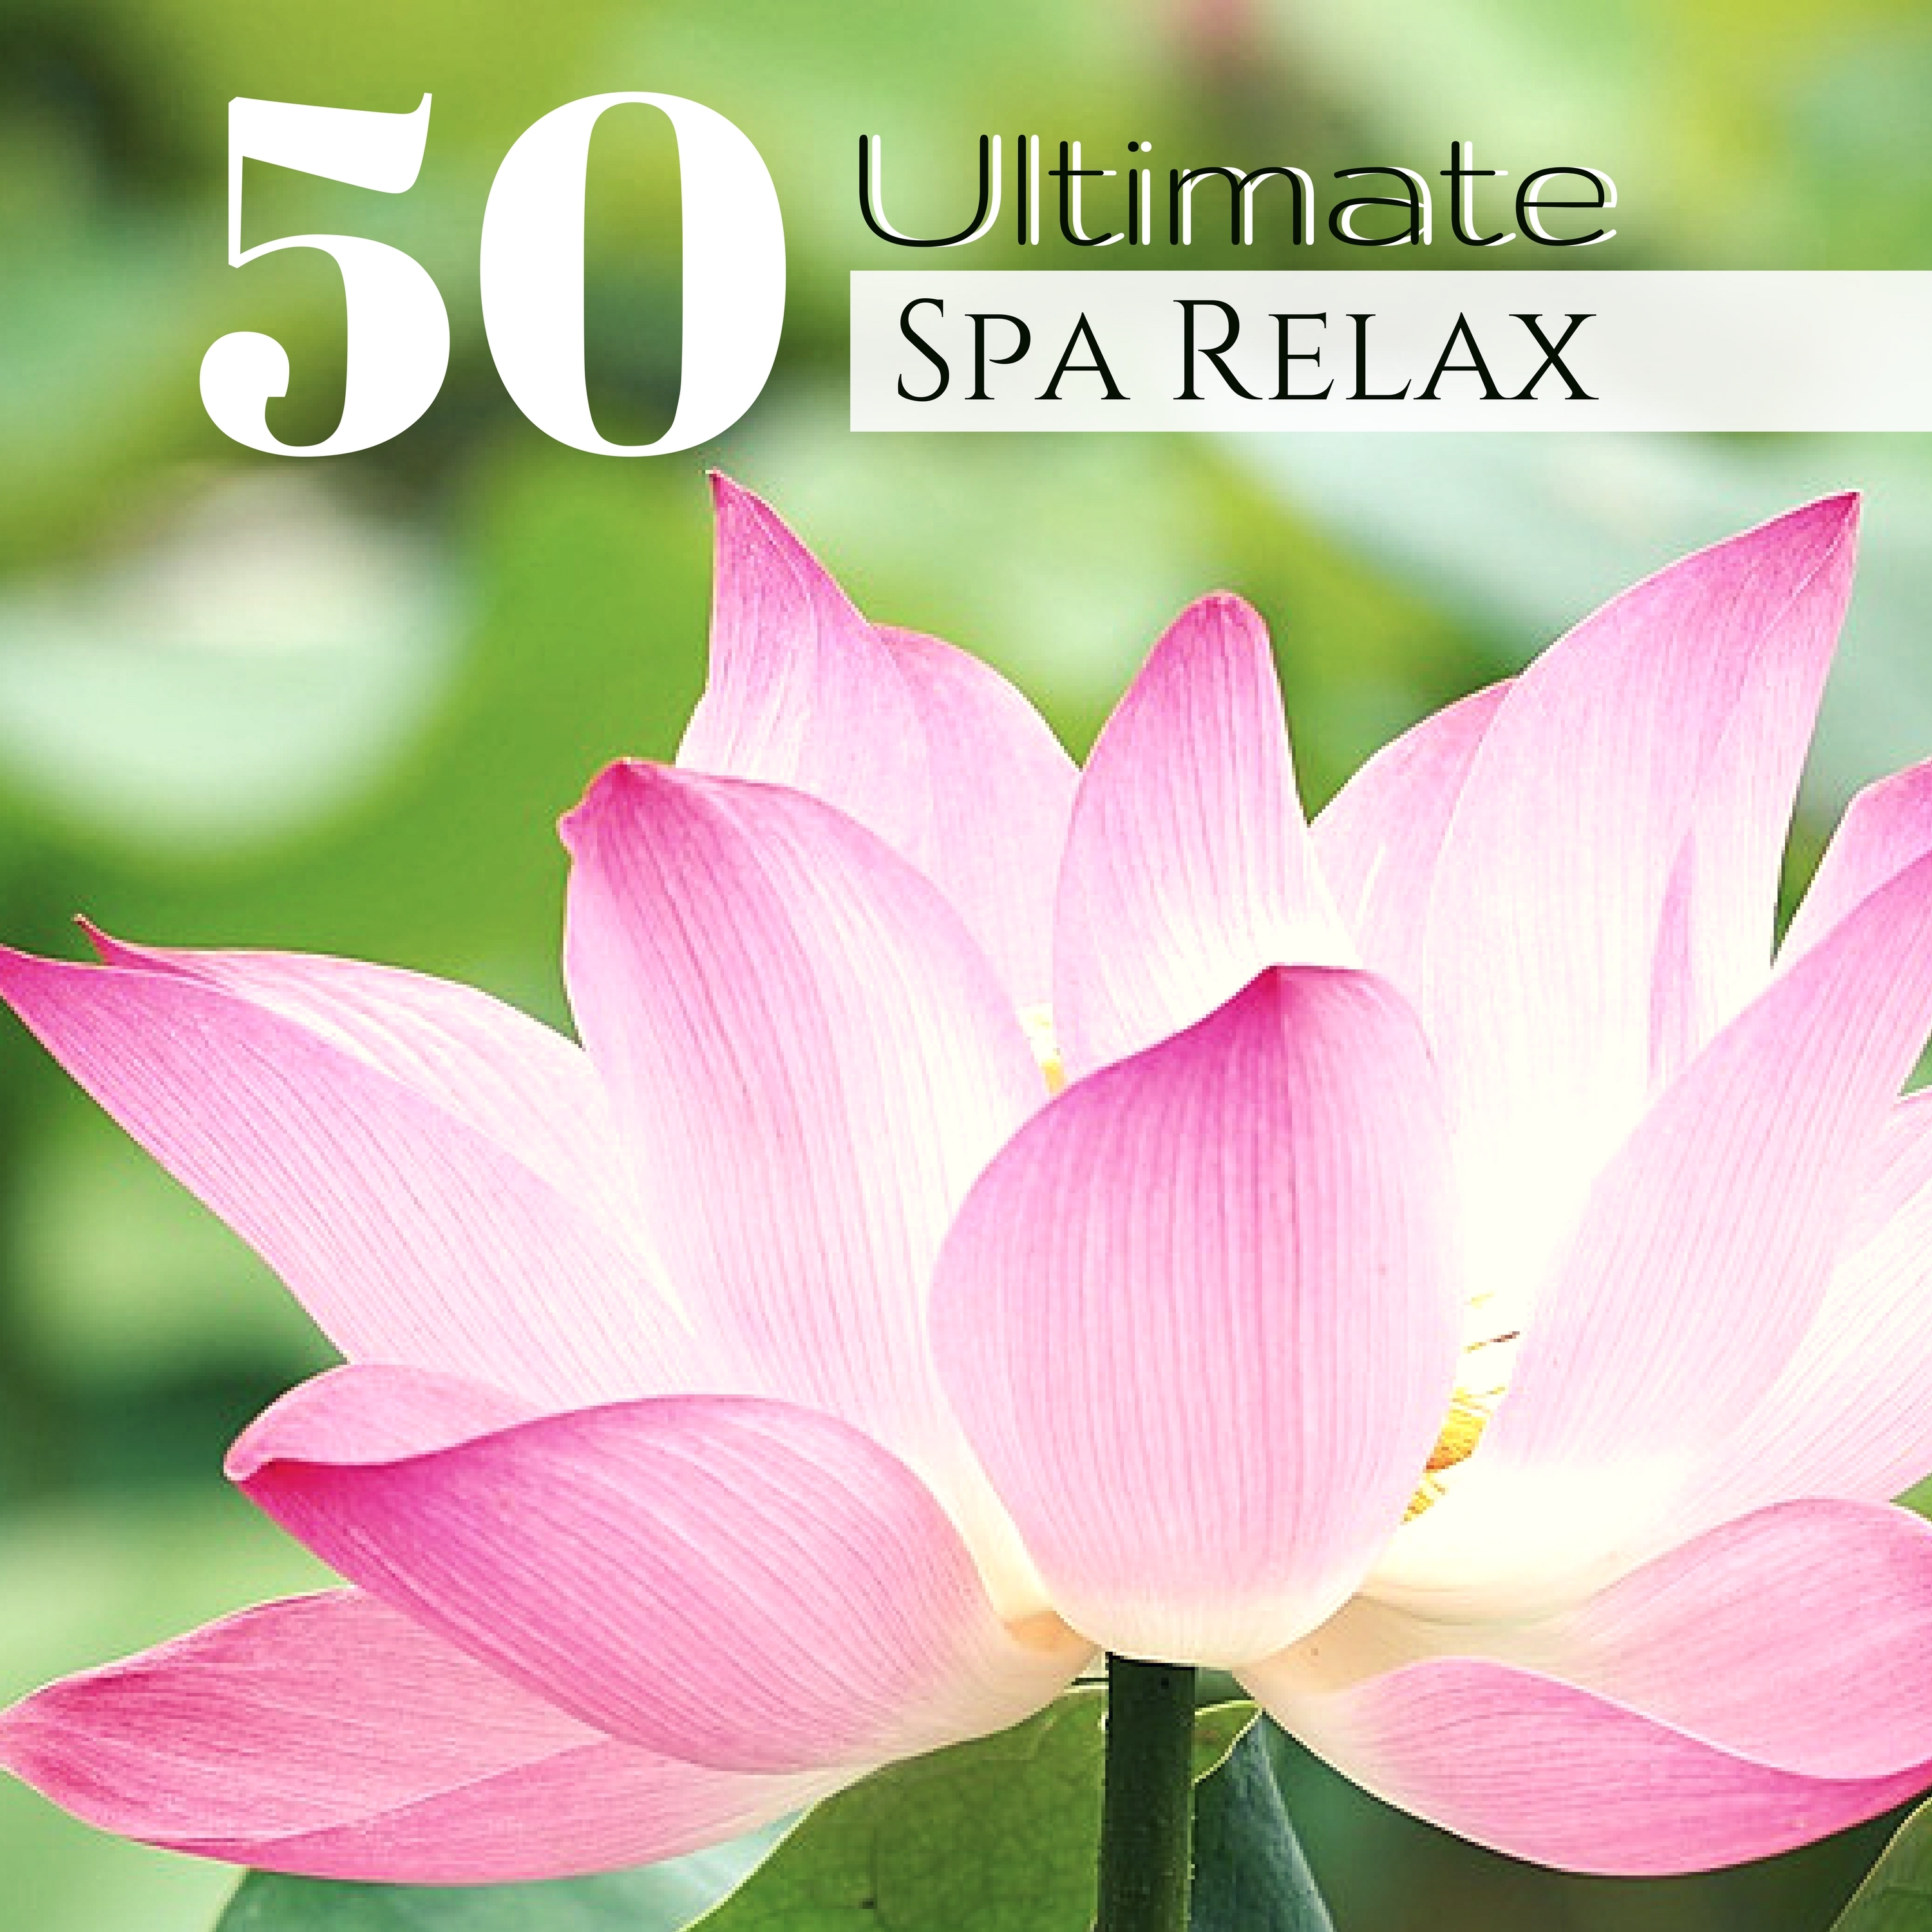 Ultimate Spa Relax